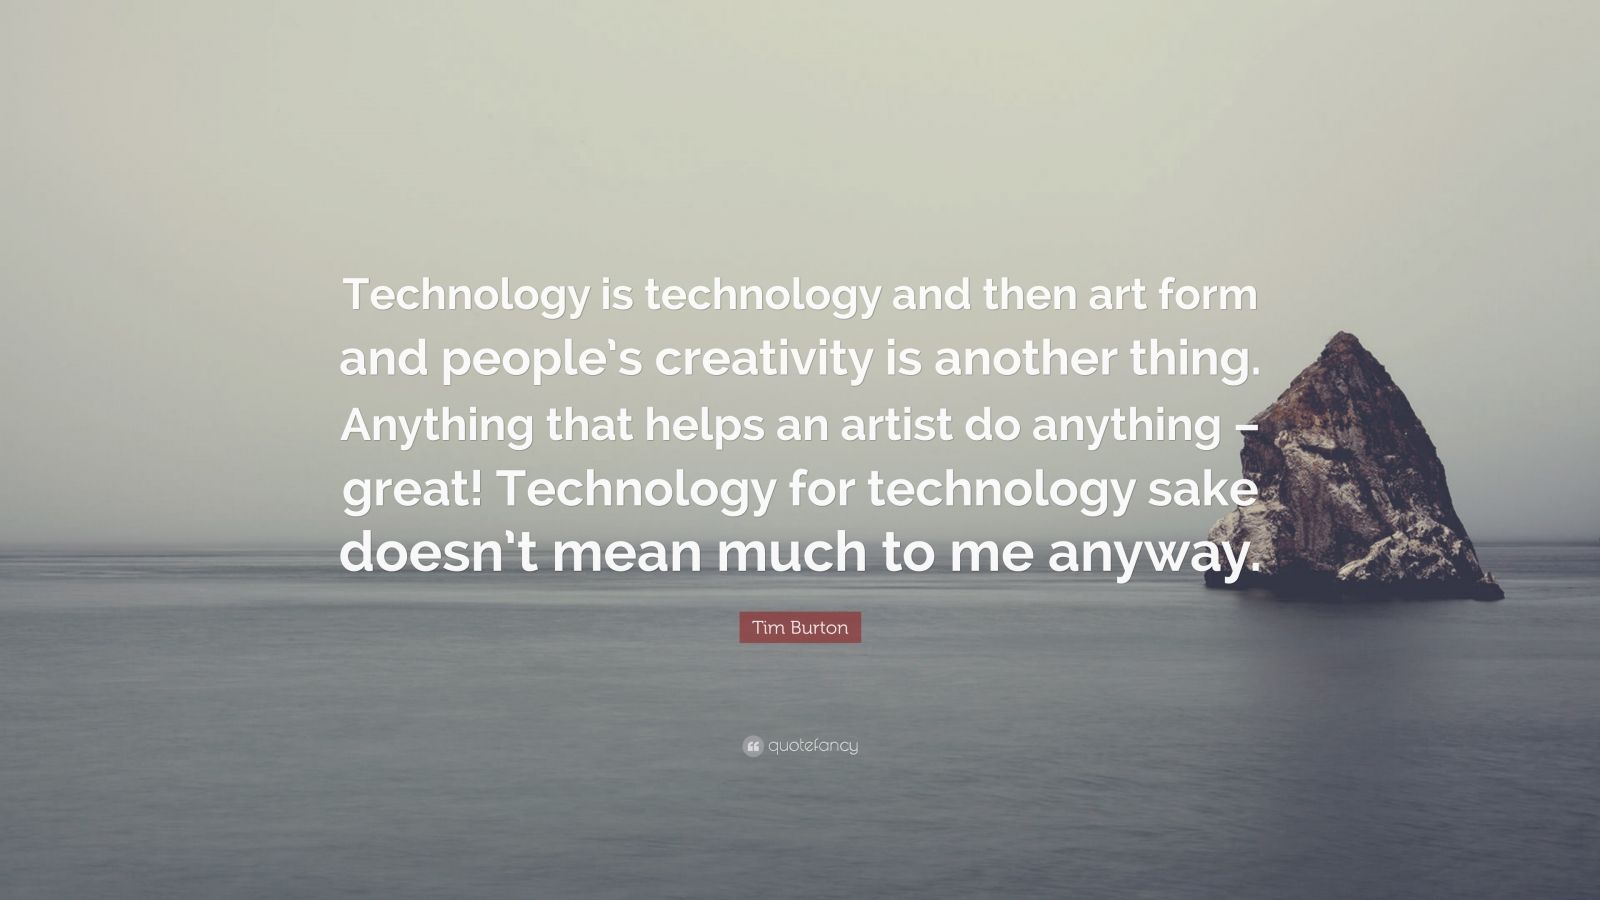 Tim Burton Quote: “Technology is technology and then art form and ...